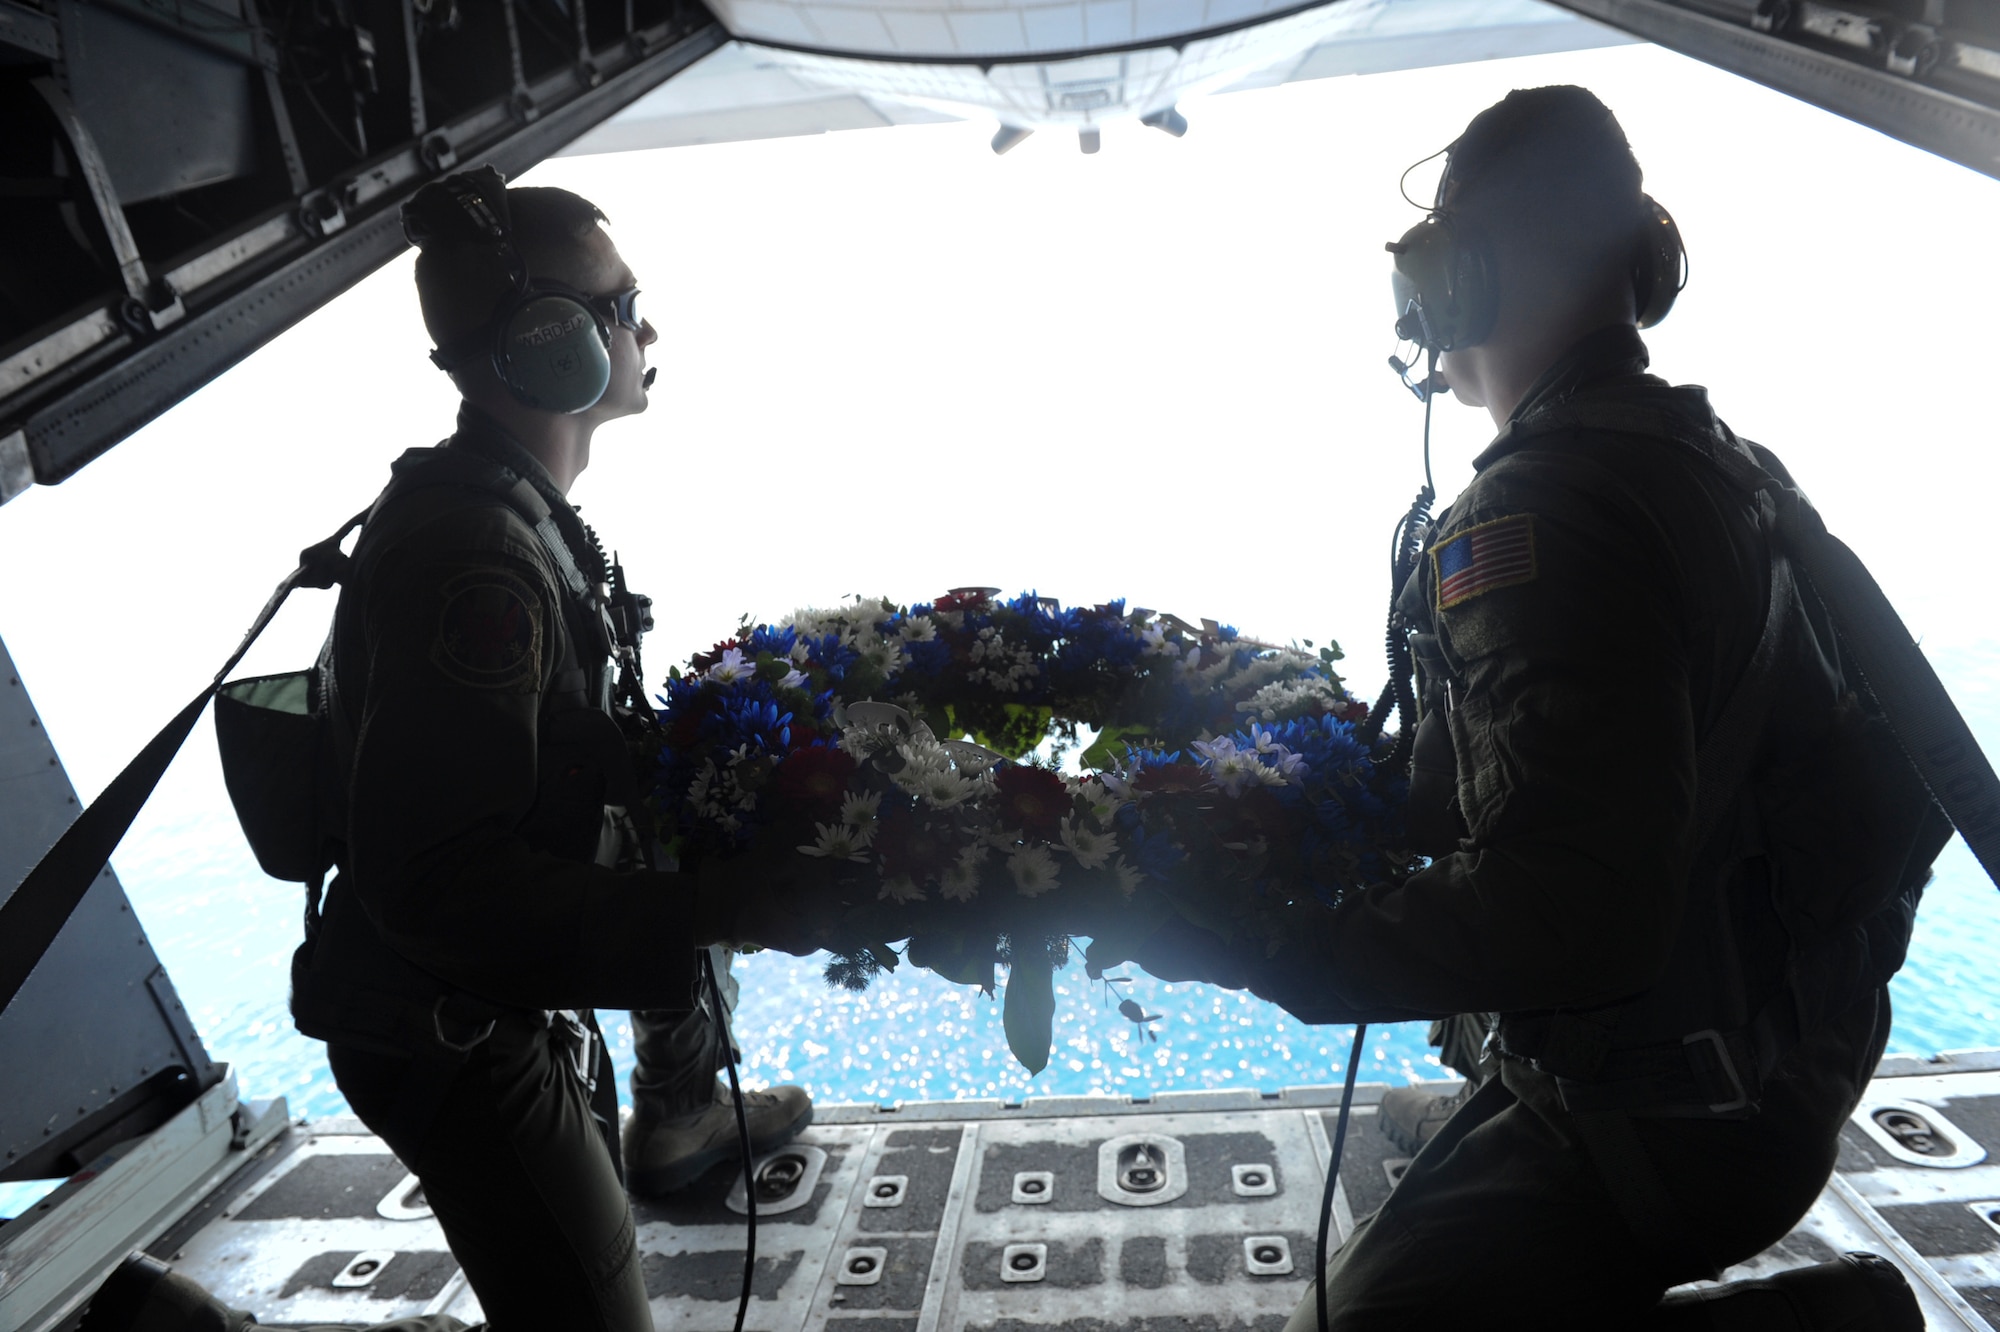 NEAR CAPONES ISLAND, Philippines -- Staff Sgts. David Wardell (left) and Ian Macgregor, both loadmasters with the 1st Special Operations Squadron, prepare to release a wreath in memorial of STRAY 59 while aboard an MC-130H Combat Talon II Feb. 26. The flight was to honor fallen brethren that were lost 31 years ago when a 1st SOS MC-130E, call sign STRAY 59, crashed during an exercise killing eight crew members and 15 passengers. (U.S. Air Force Photo by Airman 1st Class Brooke P. Beers)